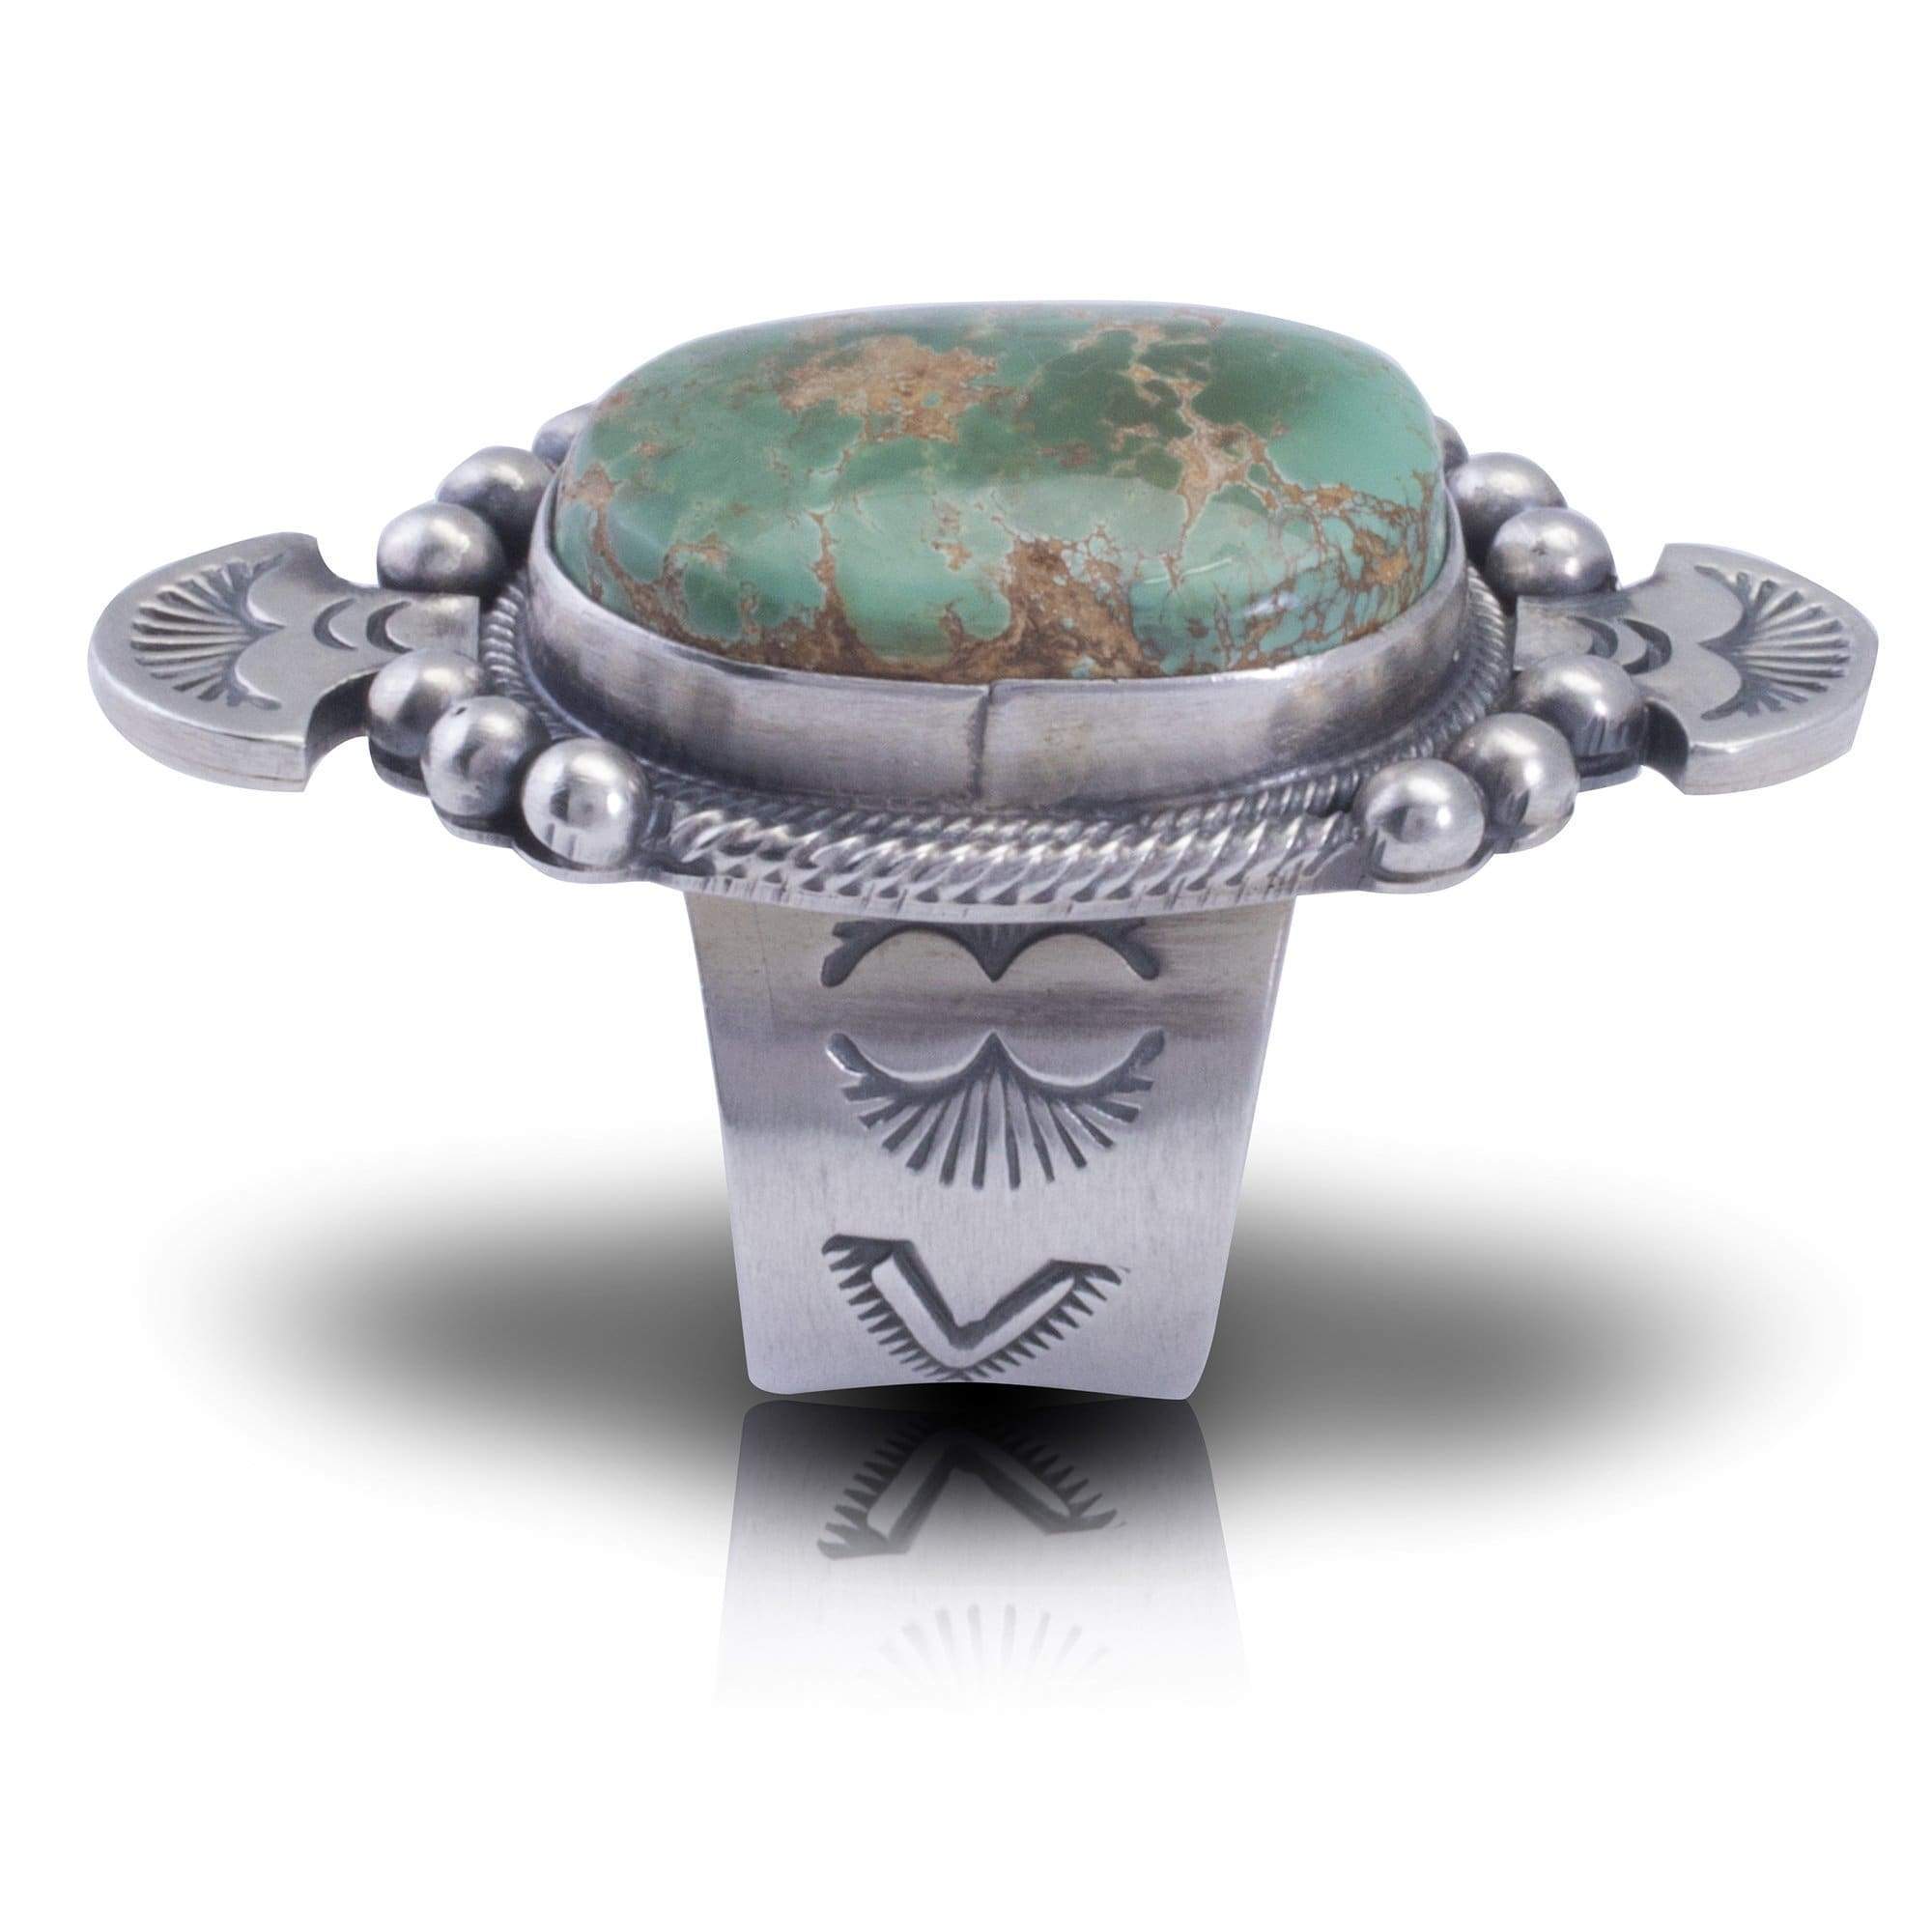 Kalifano Native American Jewelry 7 Paul Livingston Royston Turquoise USA Native American Made 925 Sterling Silver Ring NAR1400.004.7